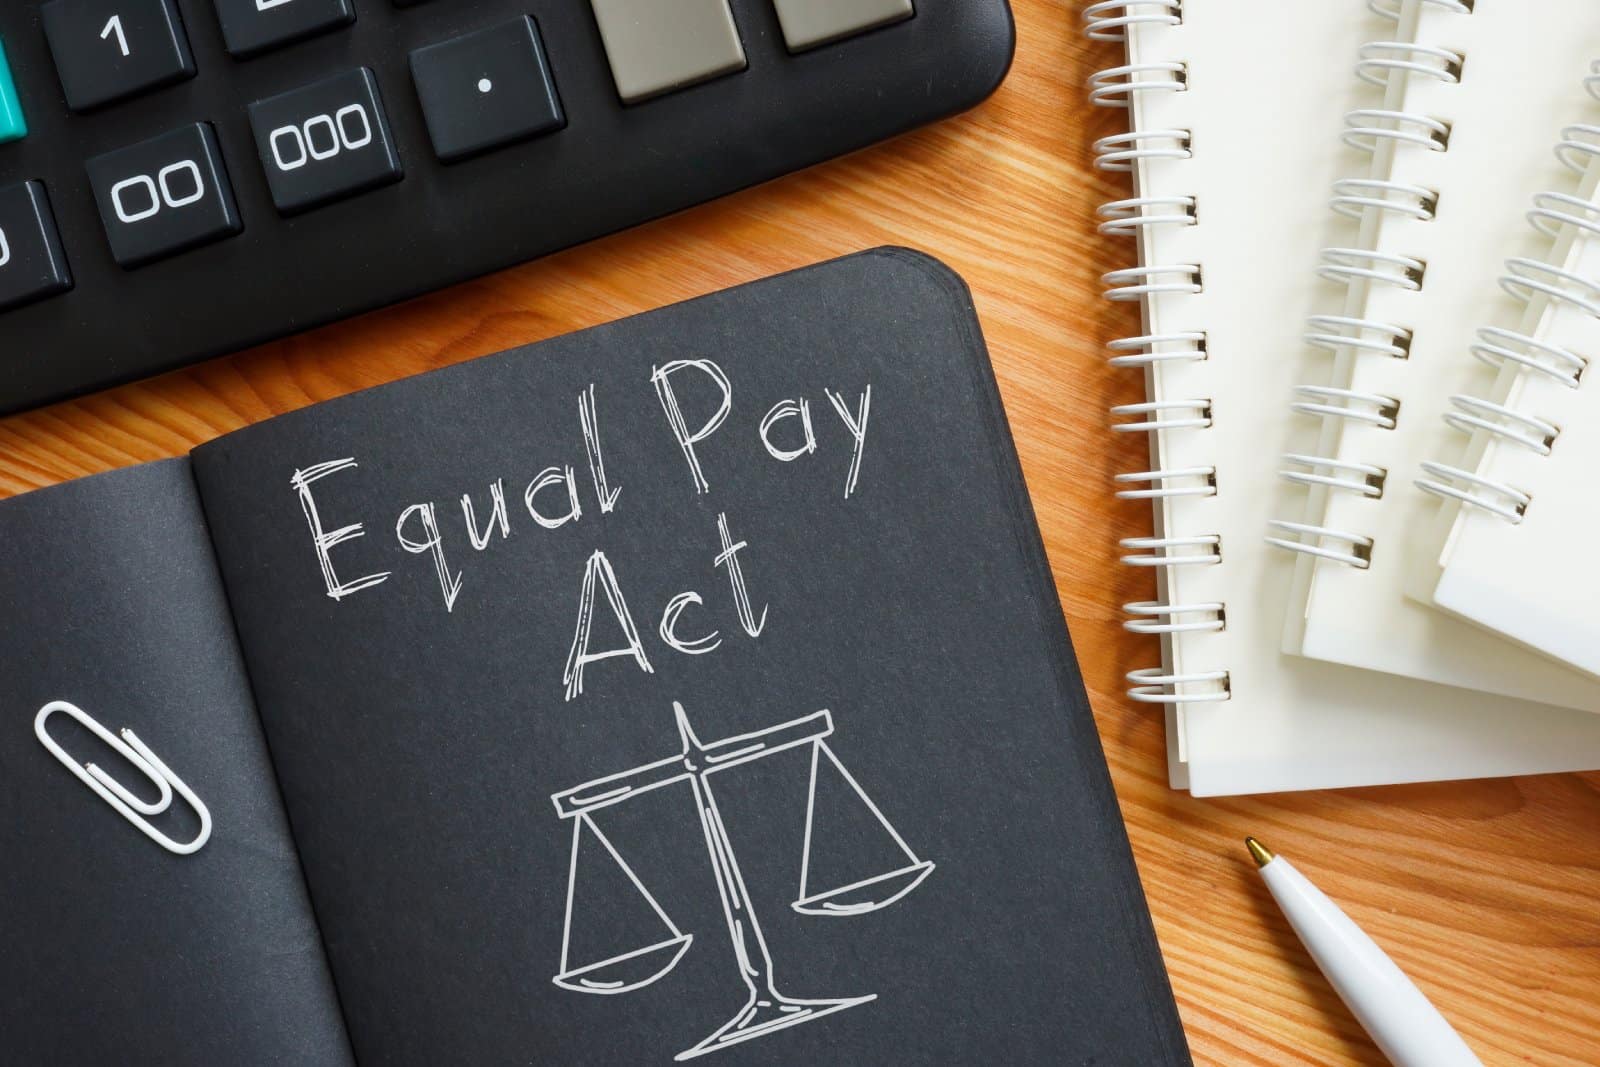 Image Credit: Shutterstock / Jack_the_sparow <p><span>The Equal Pay Act aimed to eliminate wage disparities based on gender, though challenges persisted. The Lilly Ledbetter Fair Pay Act extended the statute of limitations for filing pay discrimination claims, addressing barriers to pursuing equal pay in the workplace.</span></p>